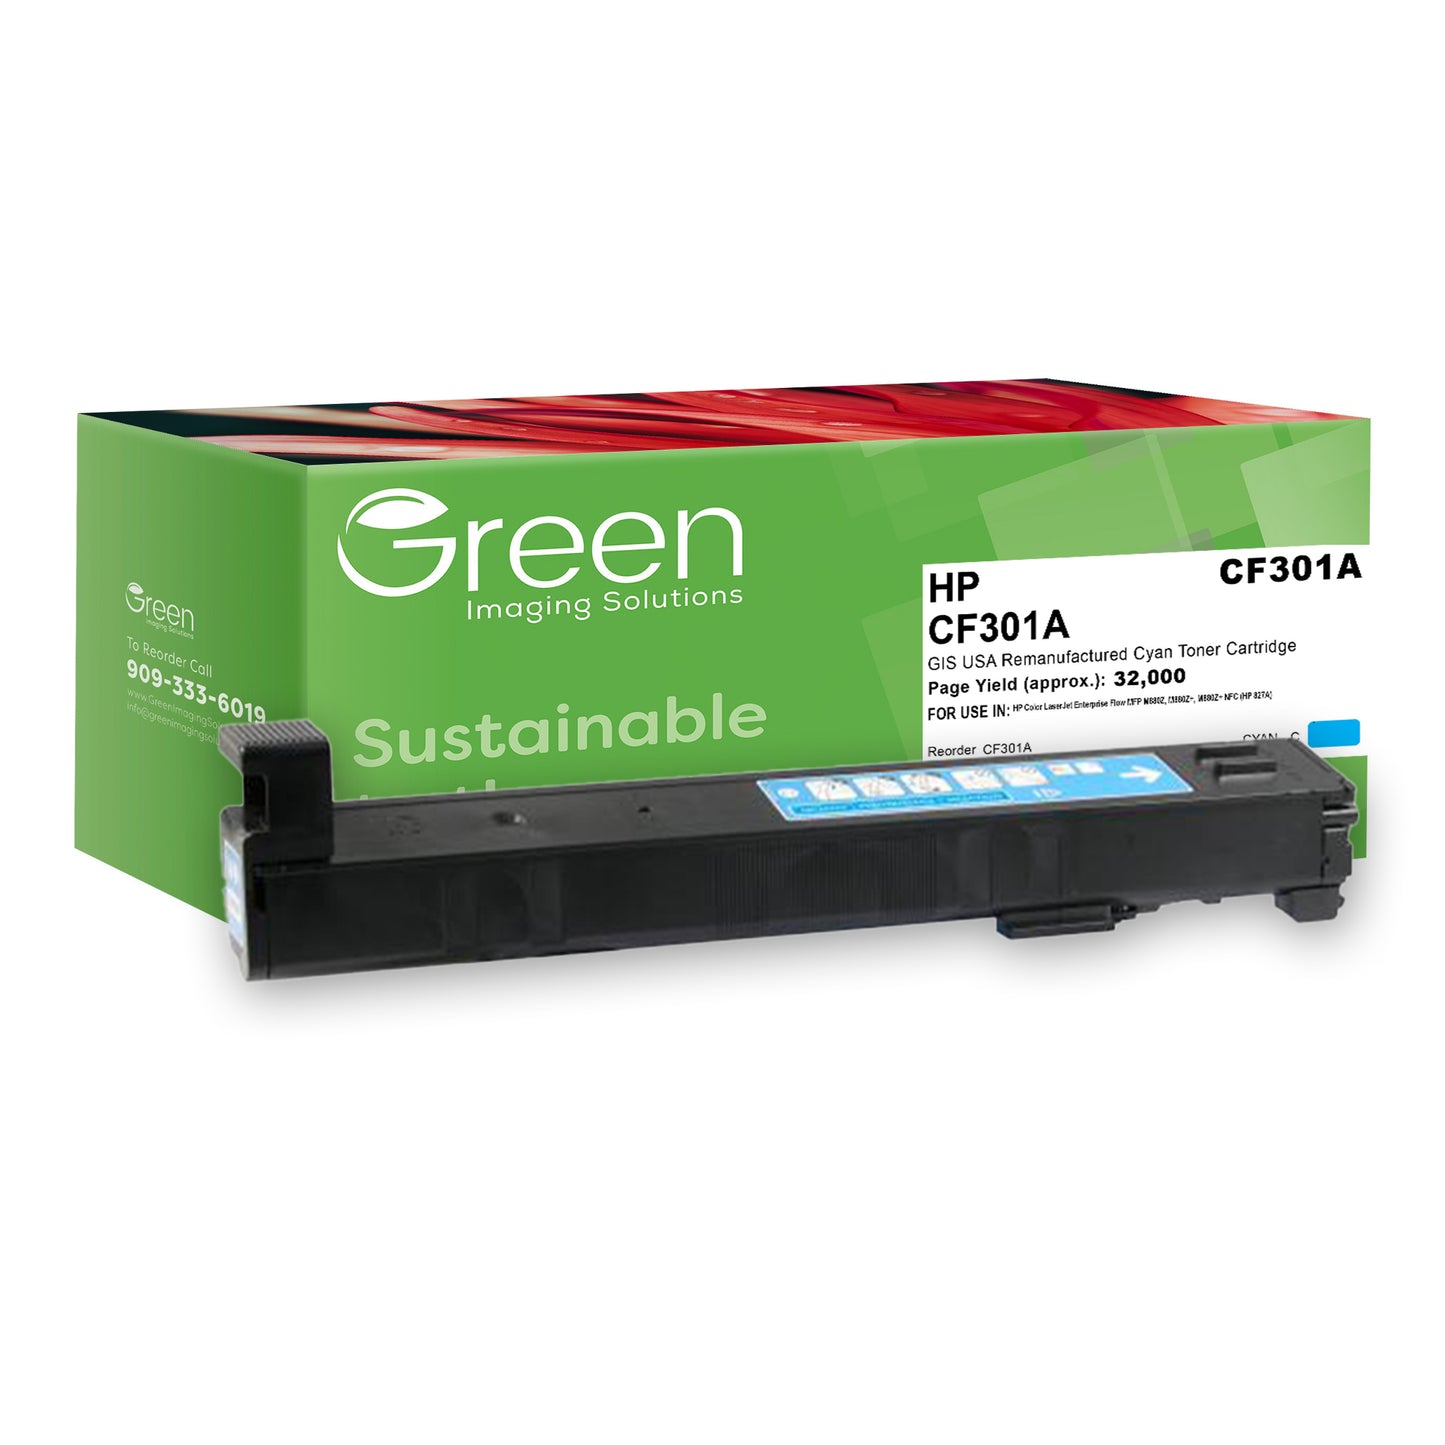 Green Imaging Solutions USA Remanufactured Cyan Toner Cartridge for HP 827A (CF301A)